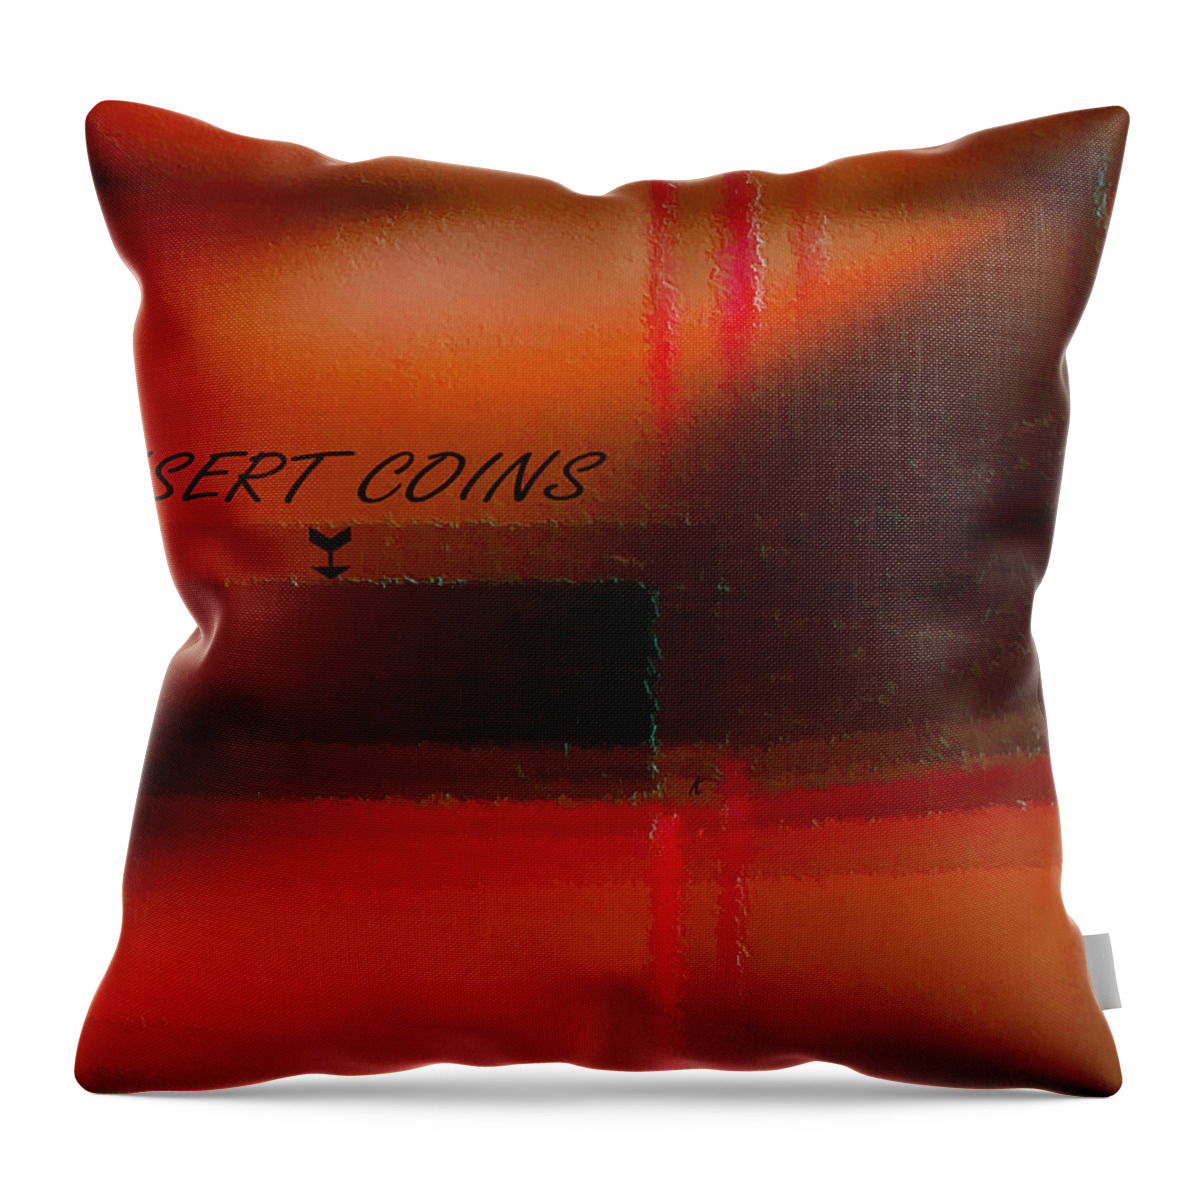 Abstract Throw Pillow featuring the digital art My Retirement Fund by John Krakora